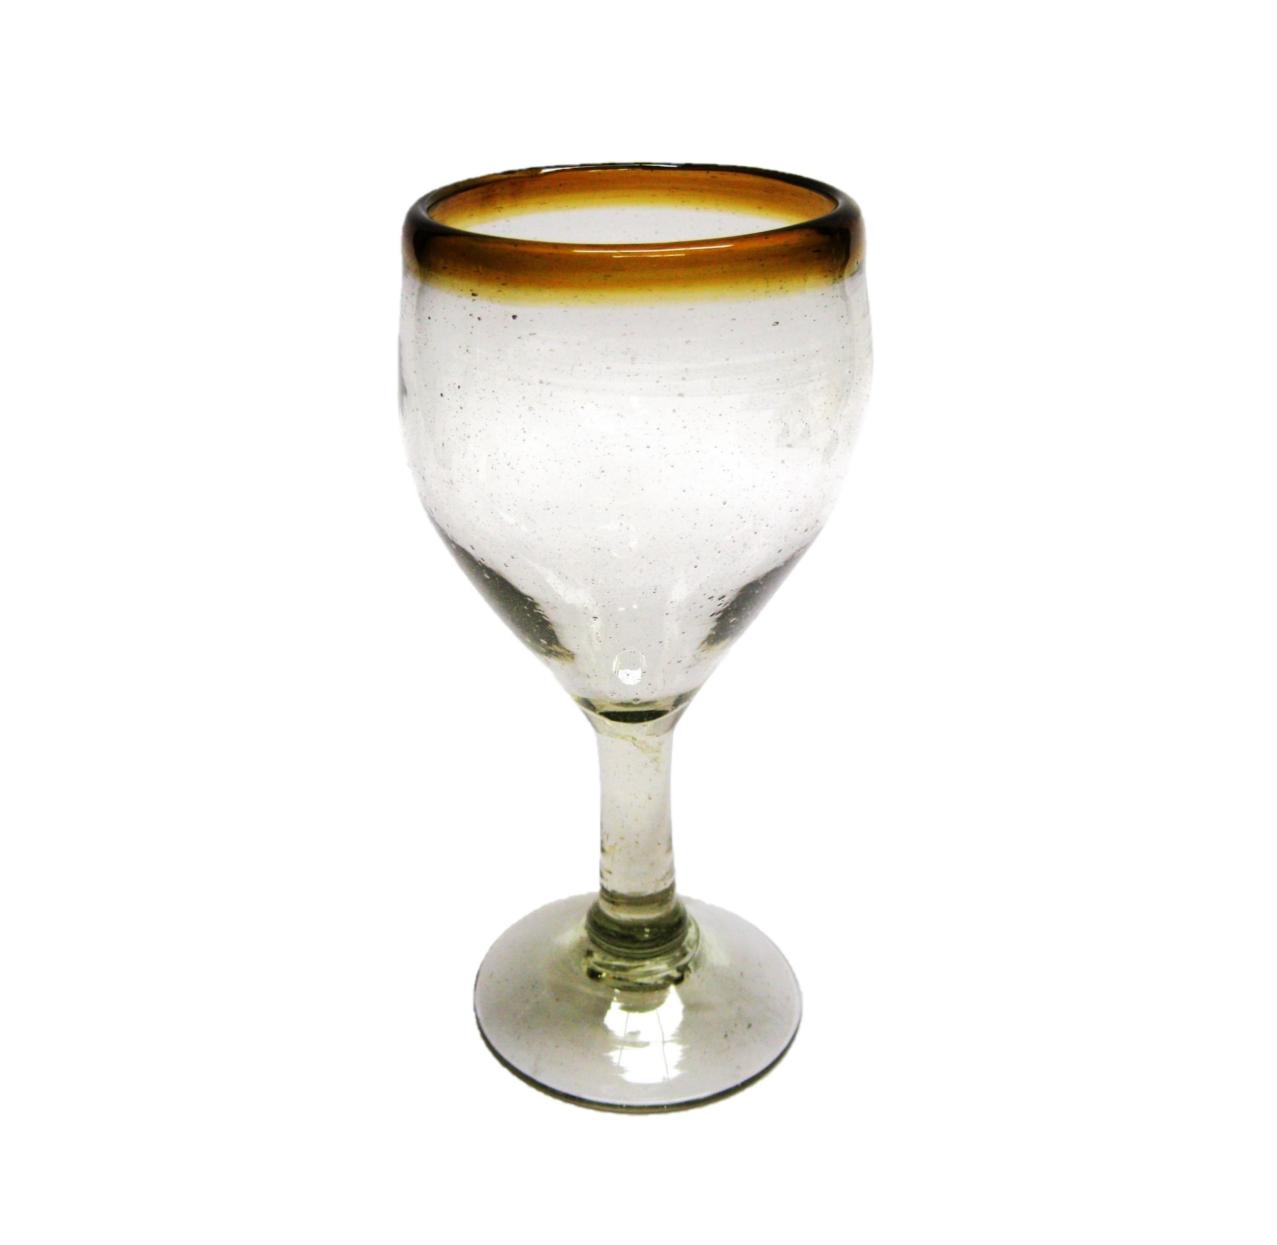 MEXICAN GLASSWARE / Amber Rim 7 oz Small Wine Glasses (set of 6) / Capture the bouquet of fine red wine with these wine glasses bordered with a bright, amber color rim.